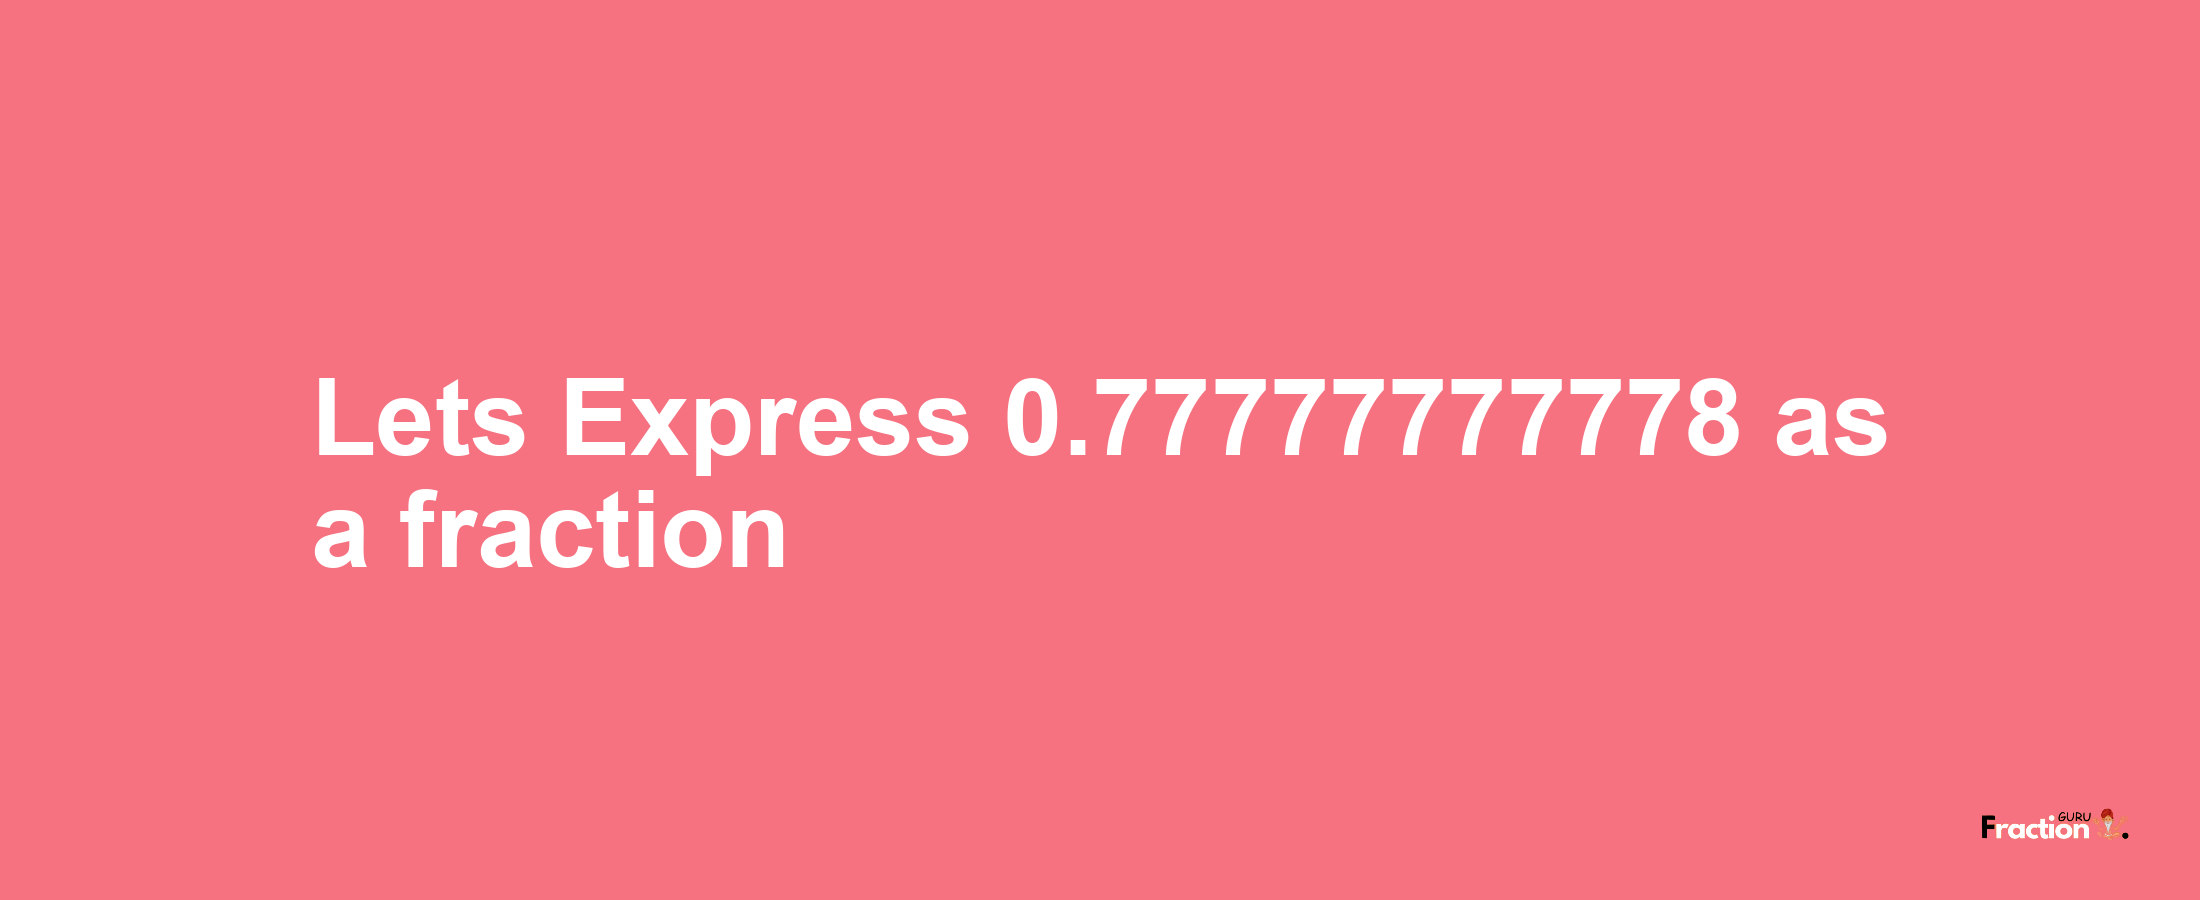 Lets Express 0.77777777778 as afraction